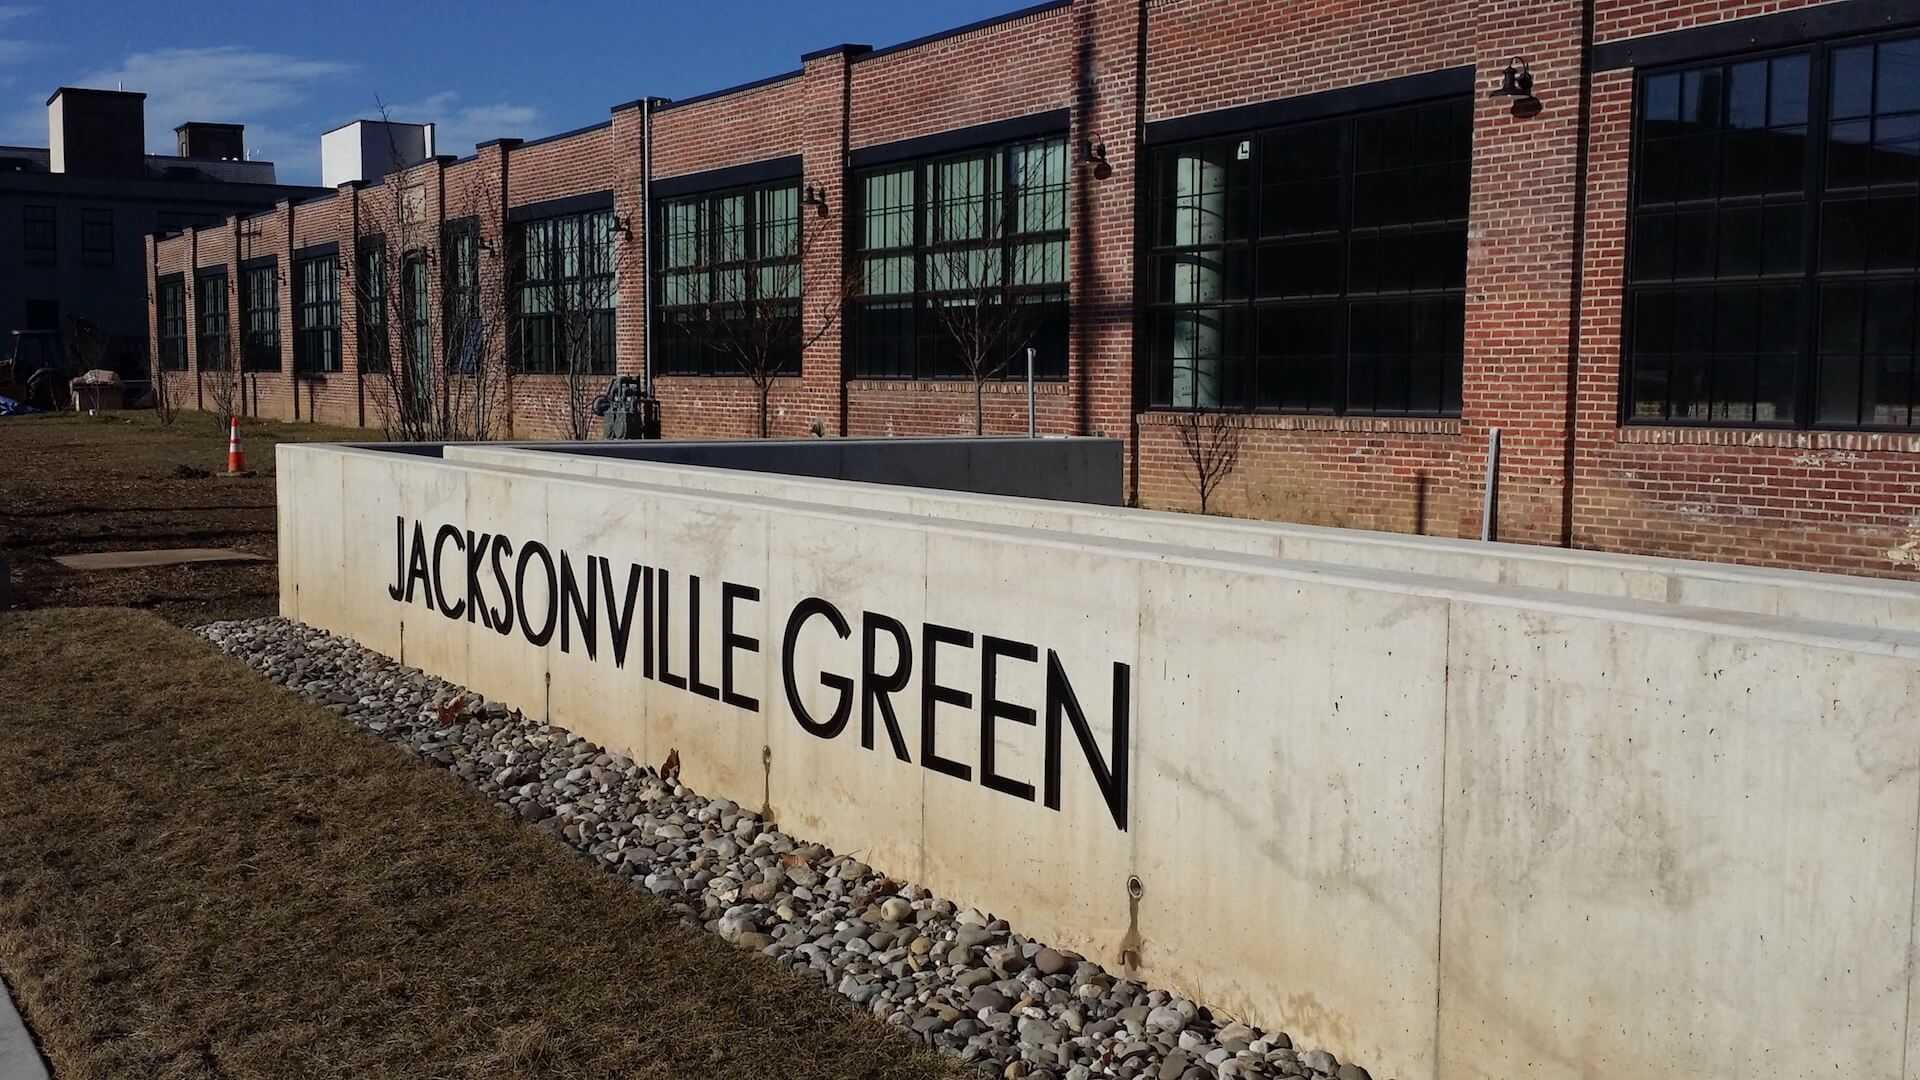 long concrete wall with Jacksonville Green on it